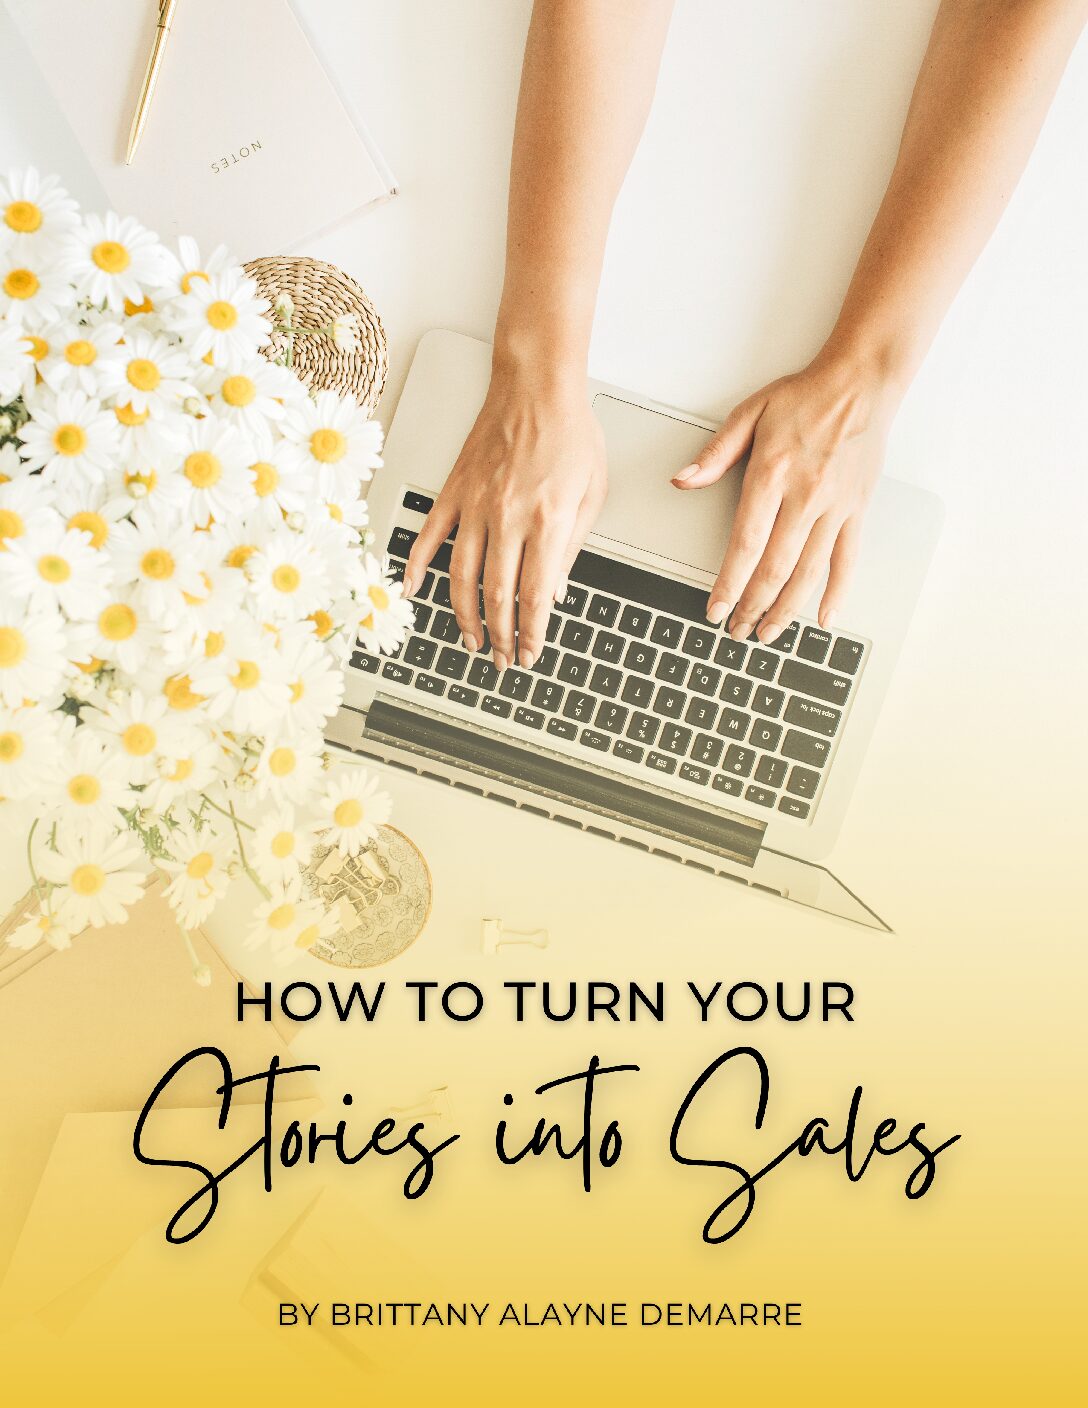 Yellow ebook cover features lovely daisies & a view of hands typing on a Macbook, symbolizing self-publishing a book.